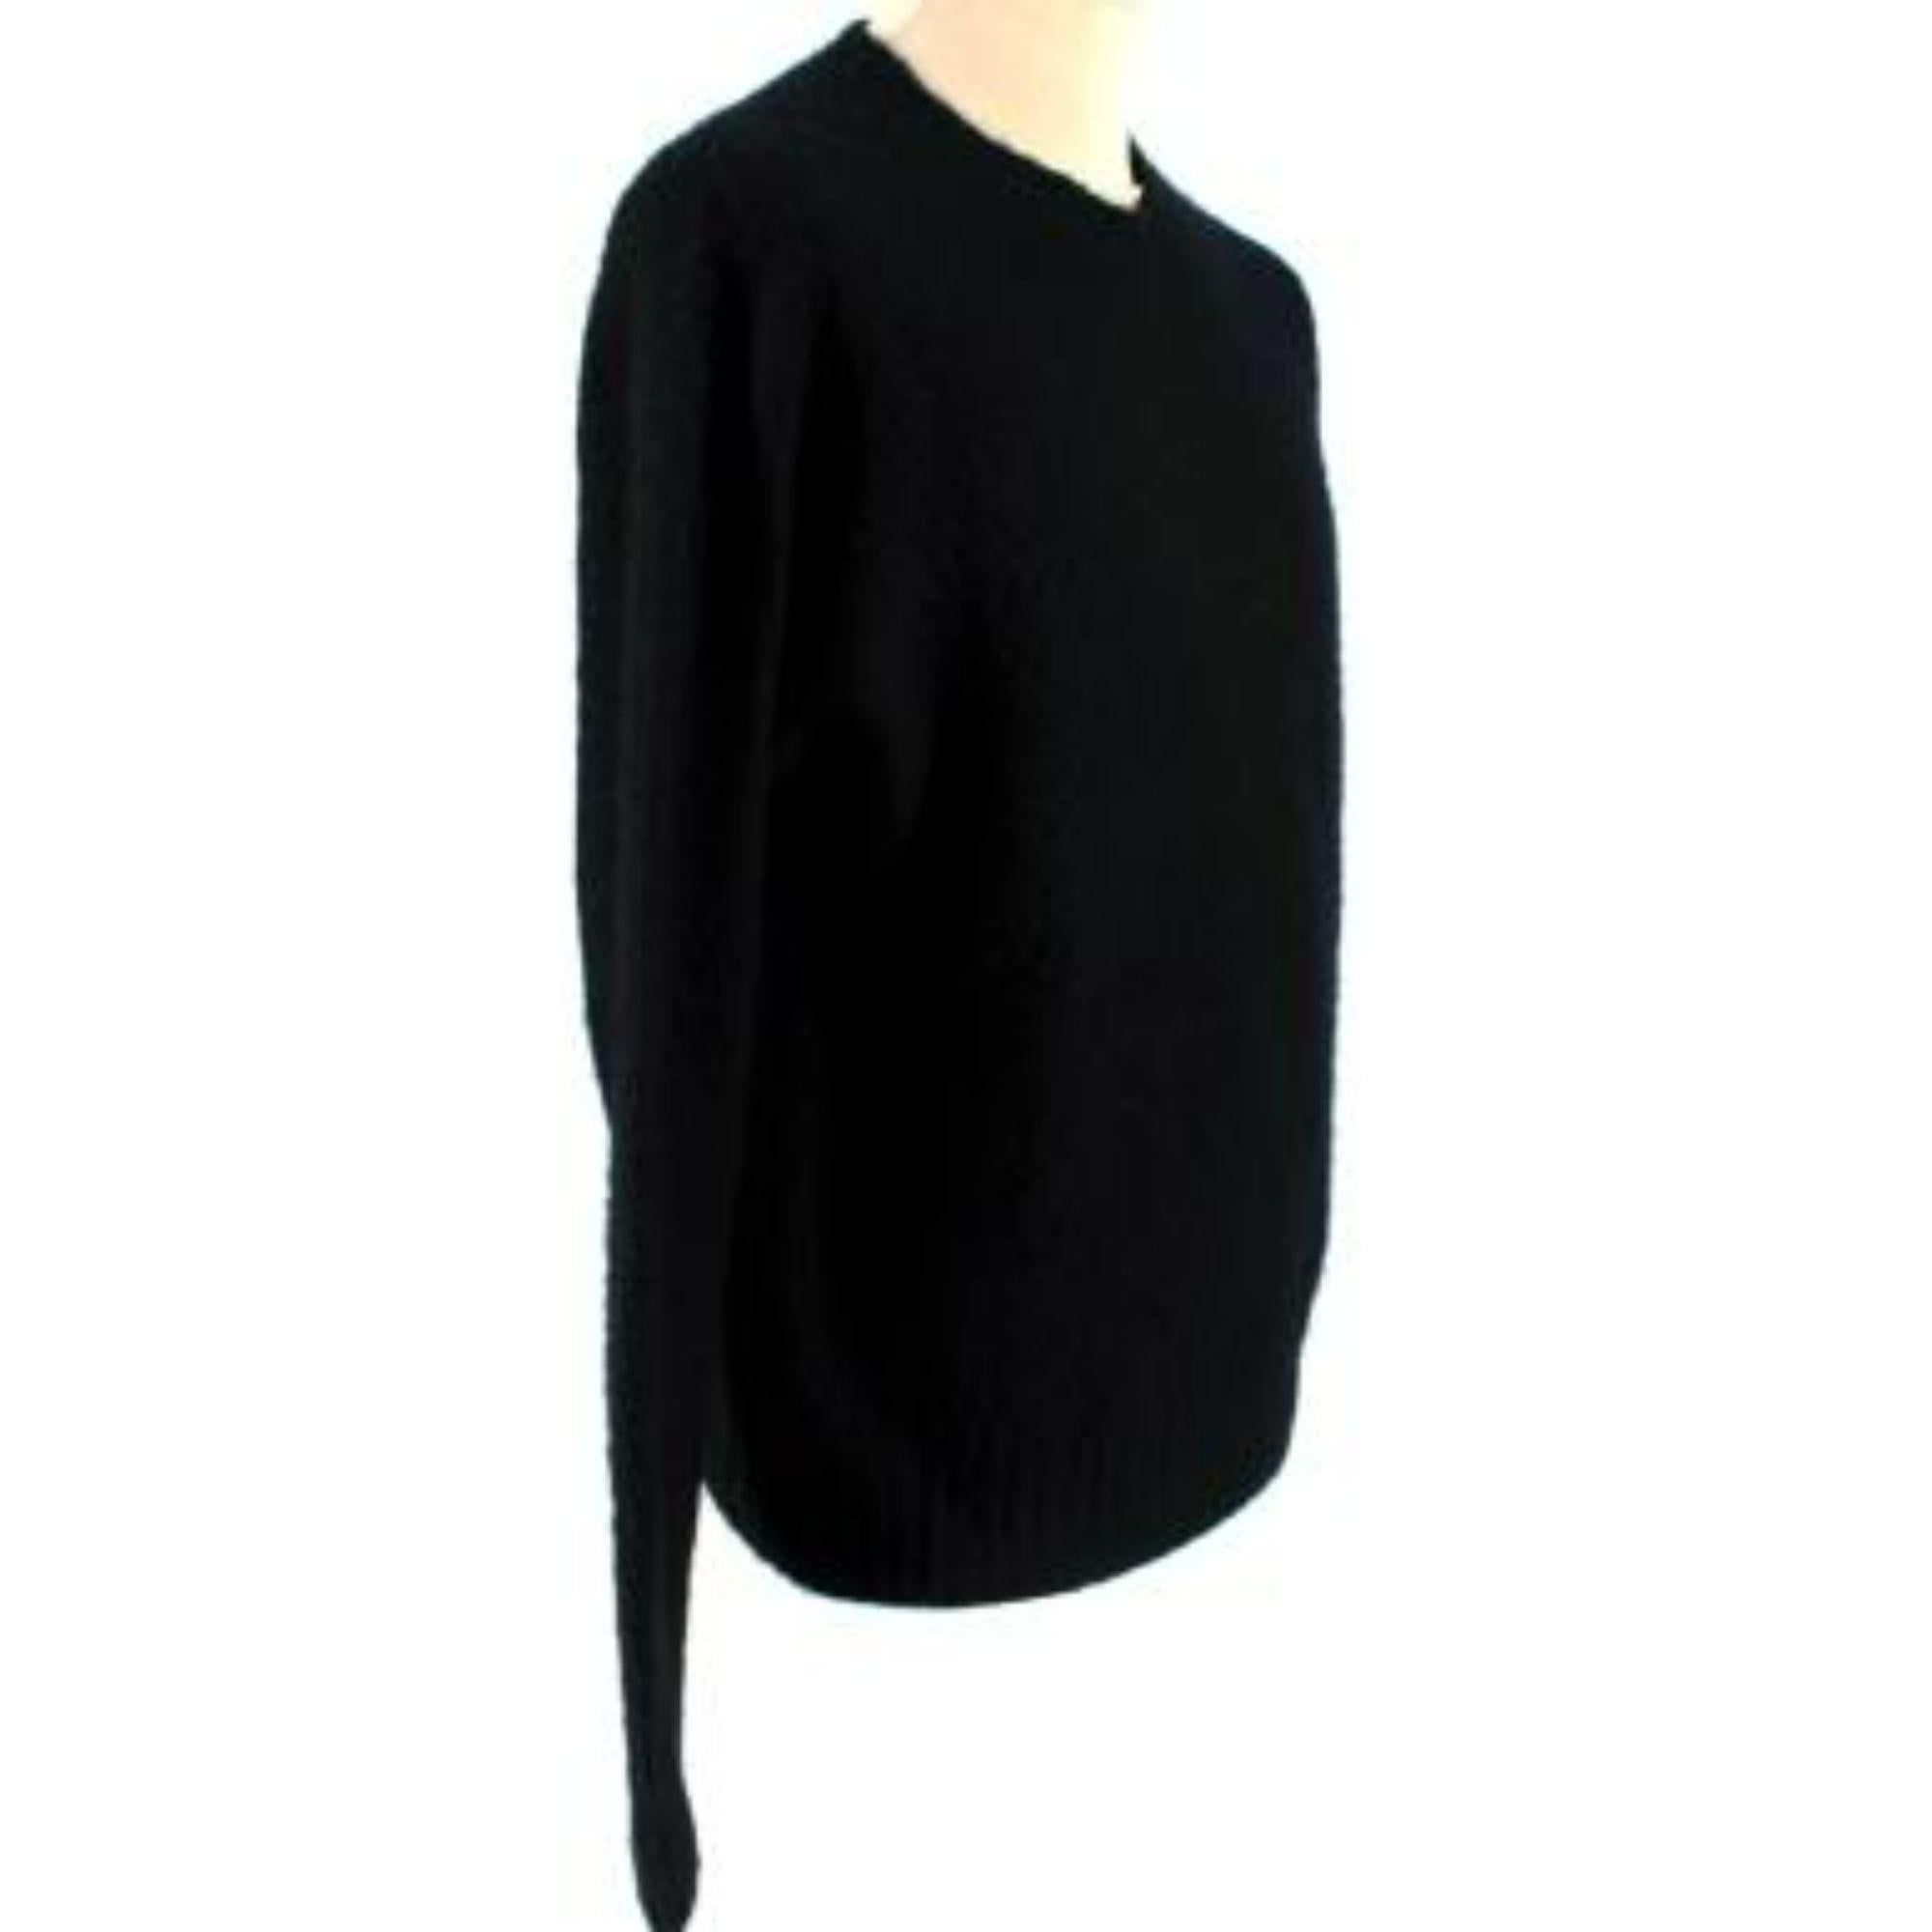 Tom Ford Black Cashmere Jumper In Good Condition For Sale In London, GB